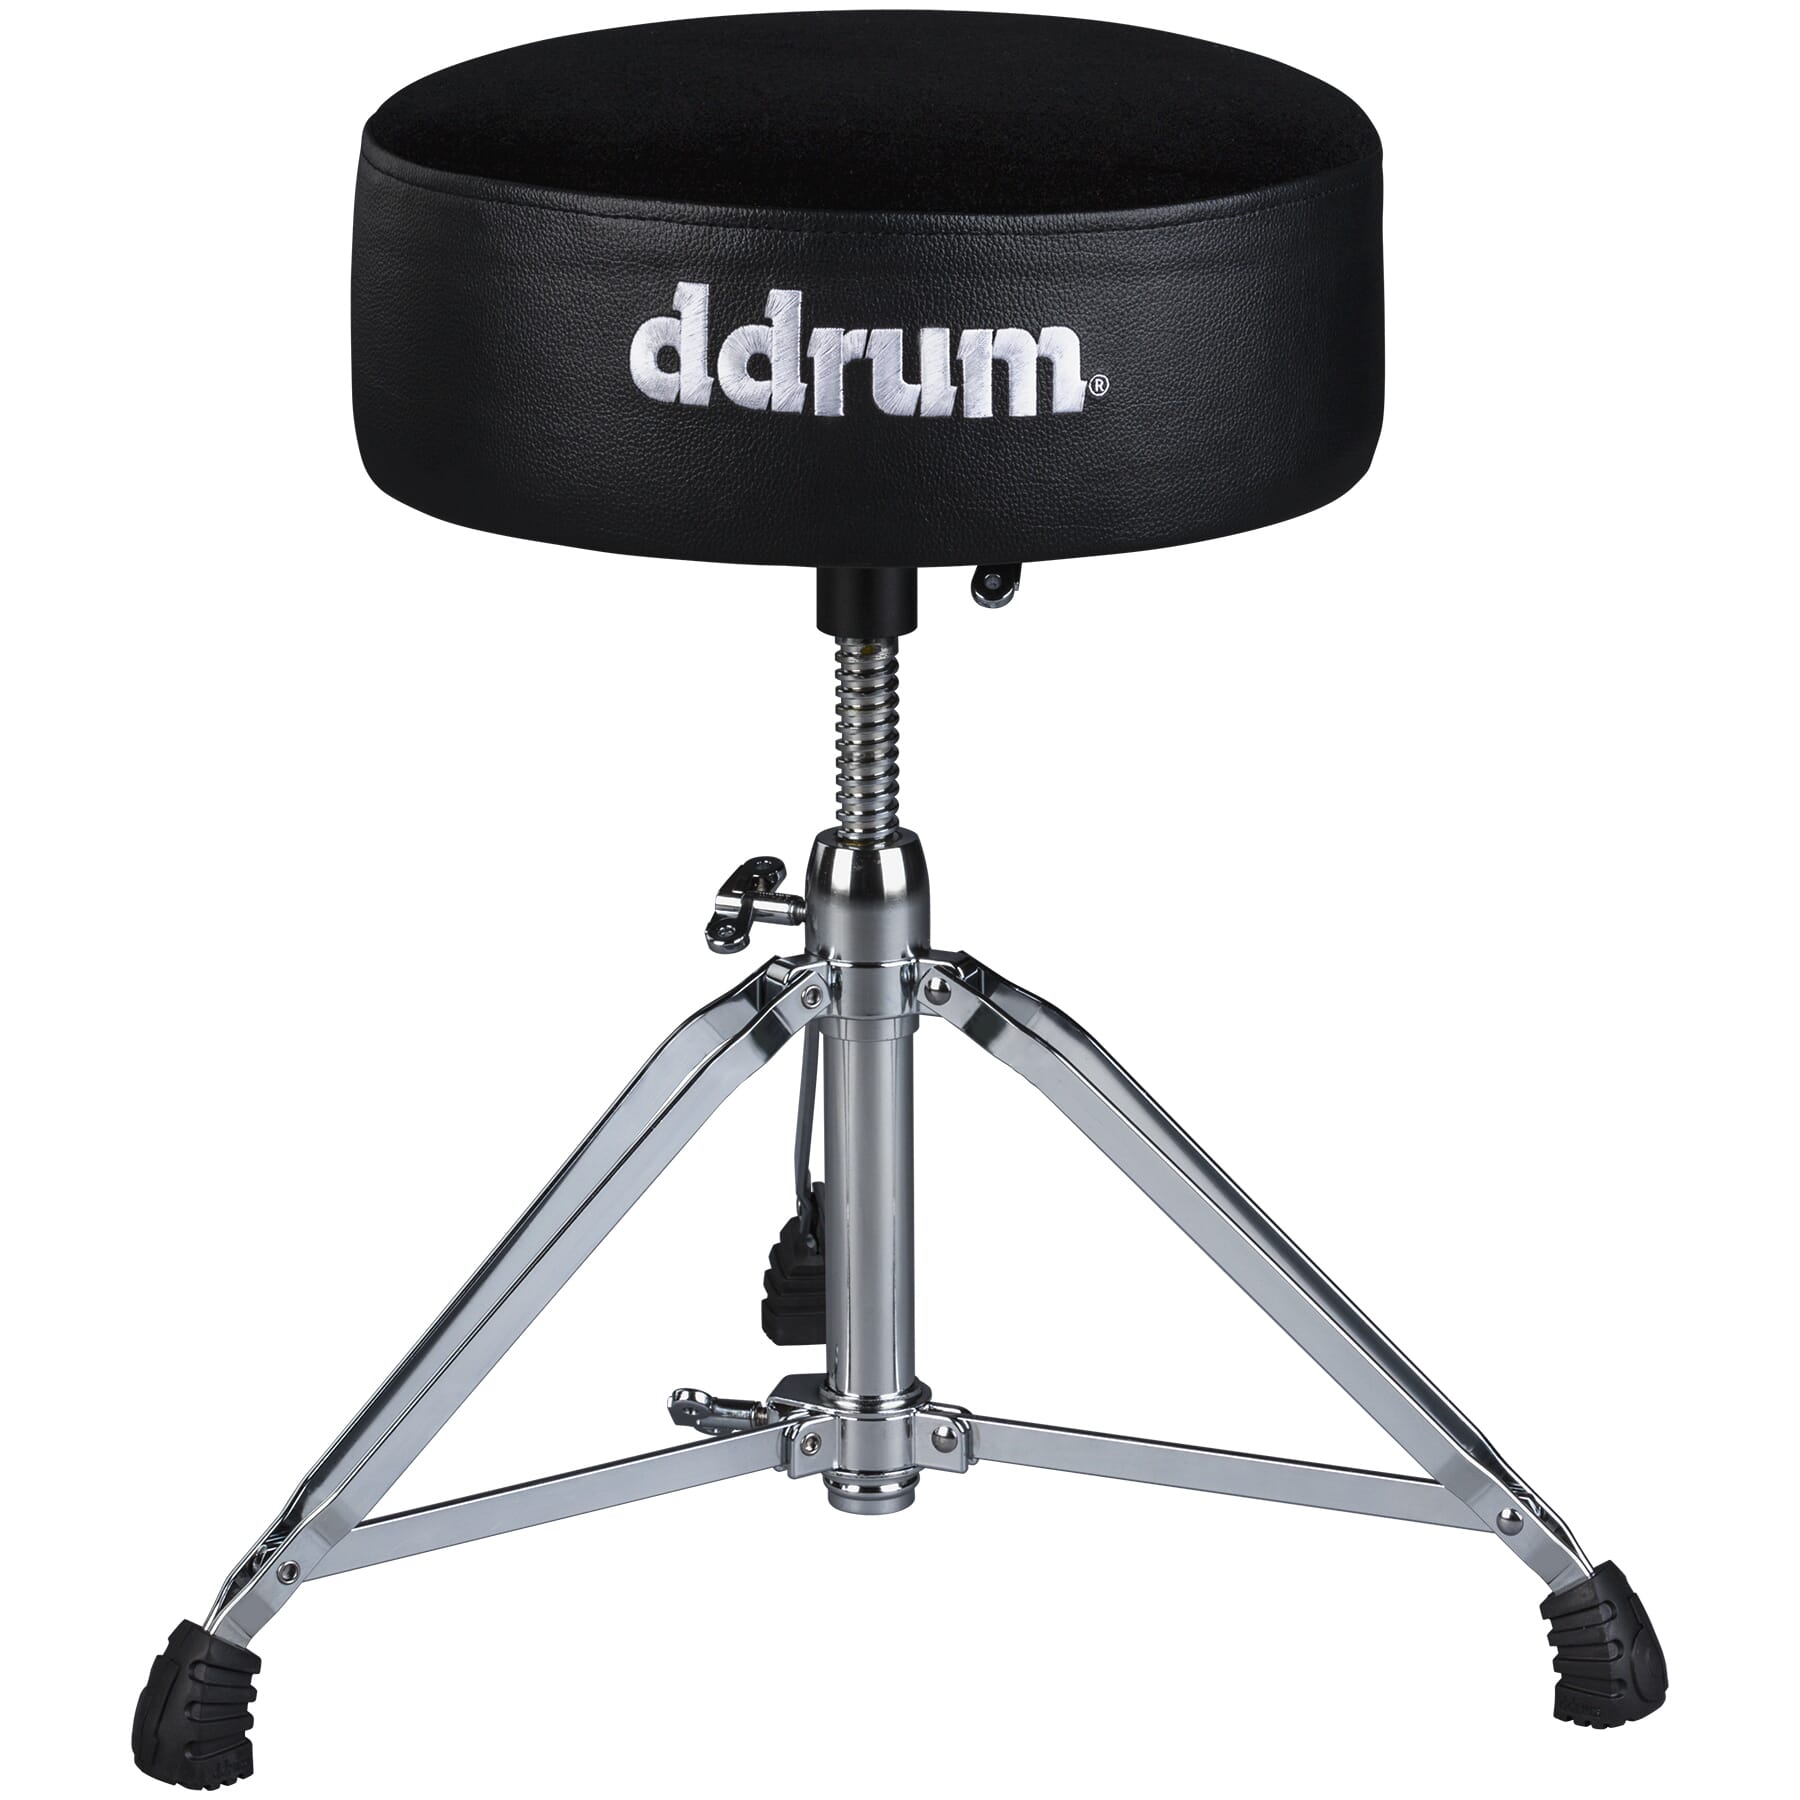 Go to ddrum.com (product subpage)